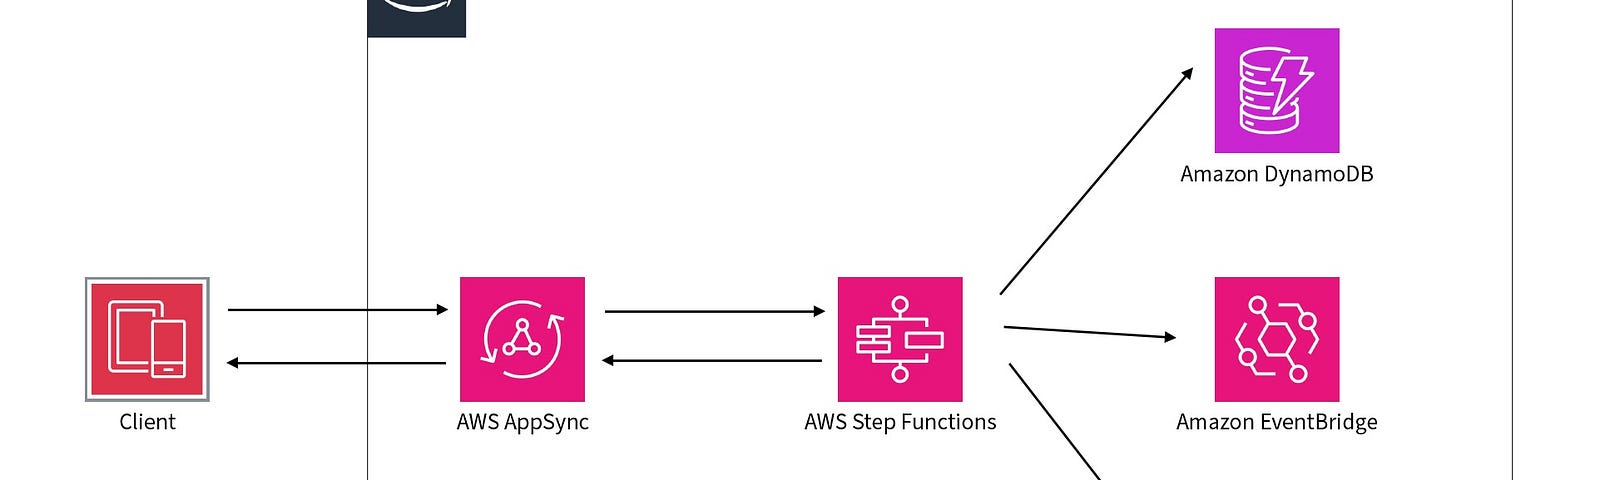 AWS architecture diagram showing the flow from the client through AppSync, then Step Functions, with a few examples of possible services, DynamoDB, Eventbridge, and Lambda